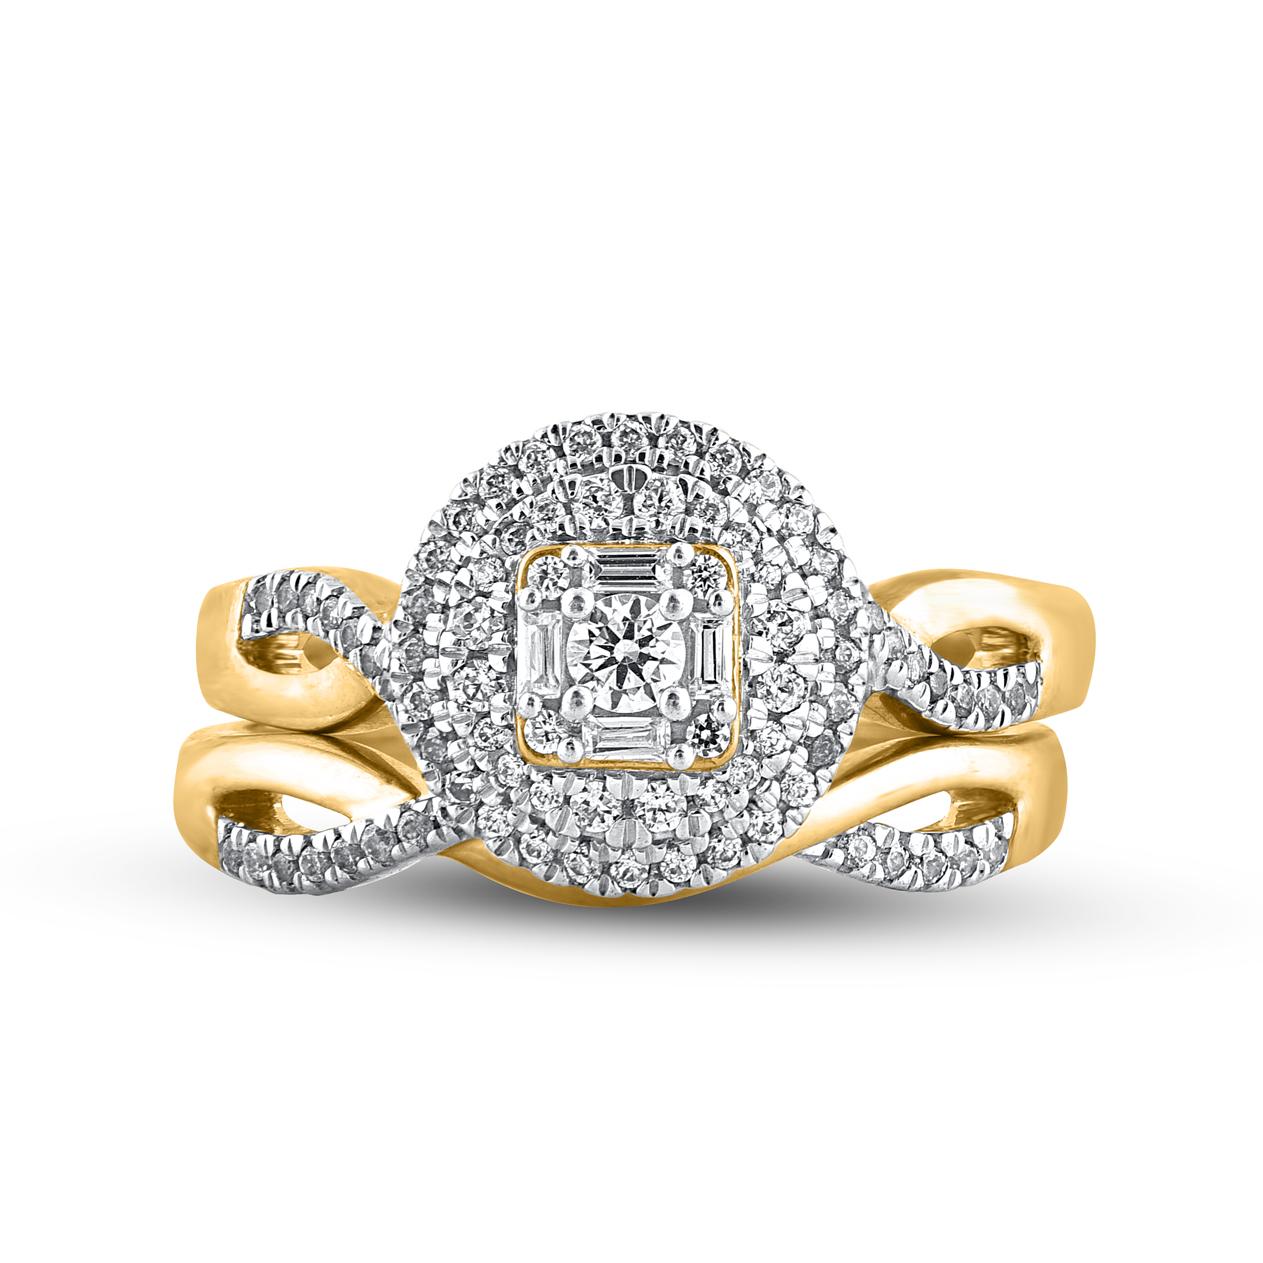 Express your love for her in the most classic way with this halo ring. This ring is expertly crafted in 14 Karat yellow gold and features of this ring 92 brilliant cut, single cut and baguette cut diamond set in prong setting. Total diamond weight